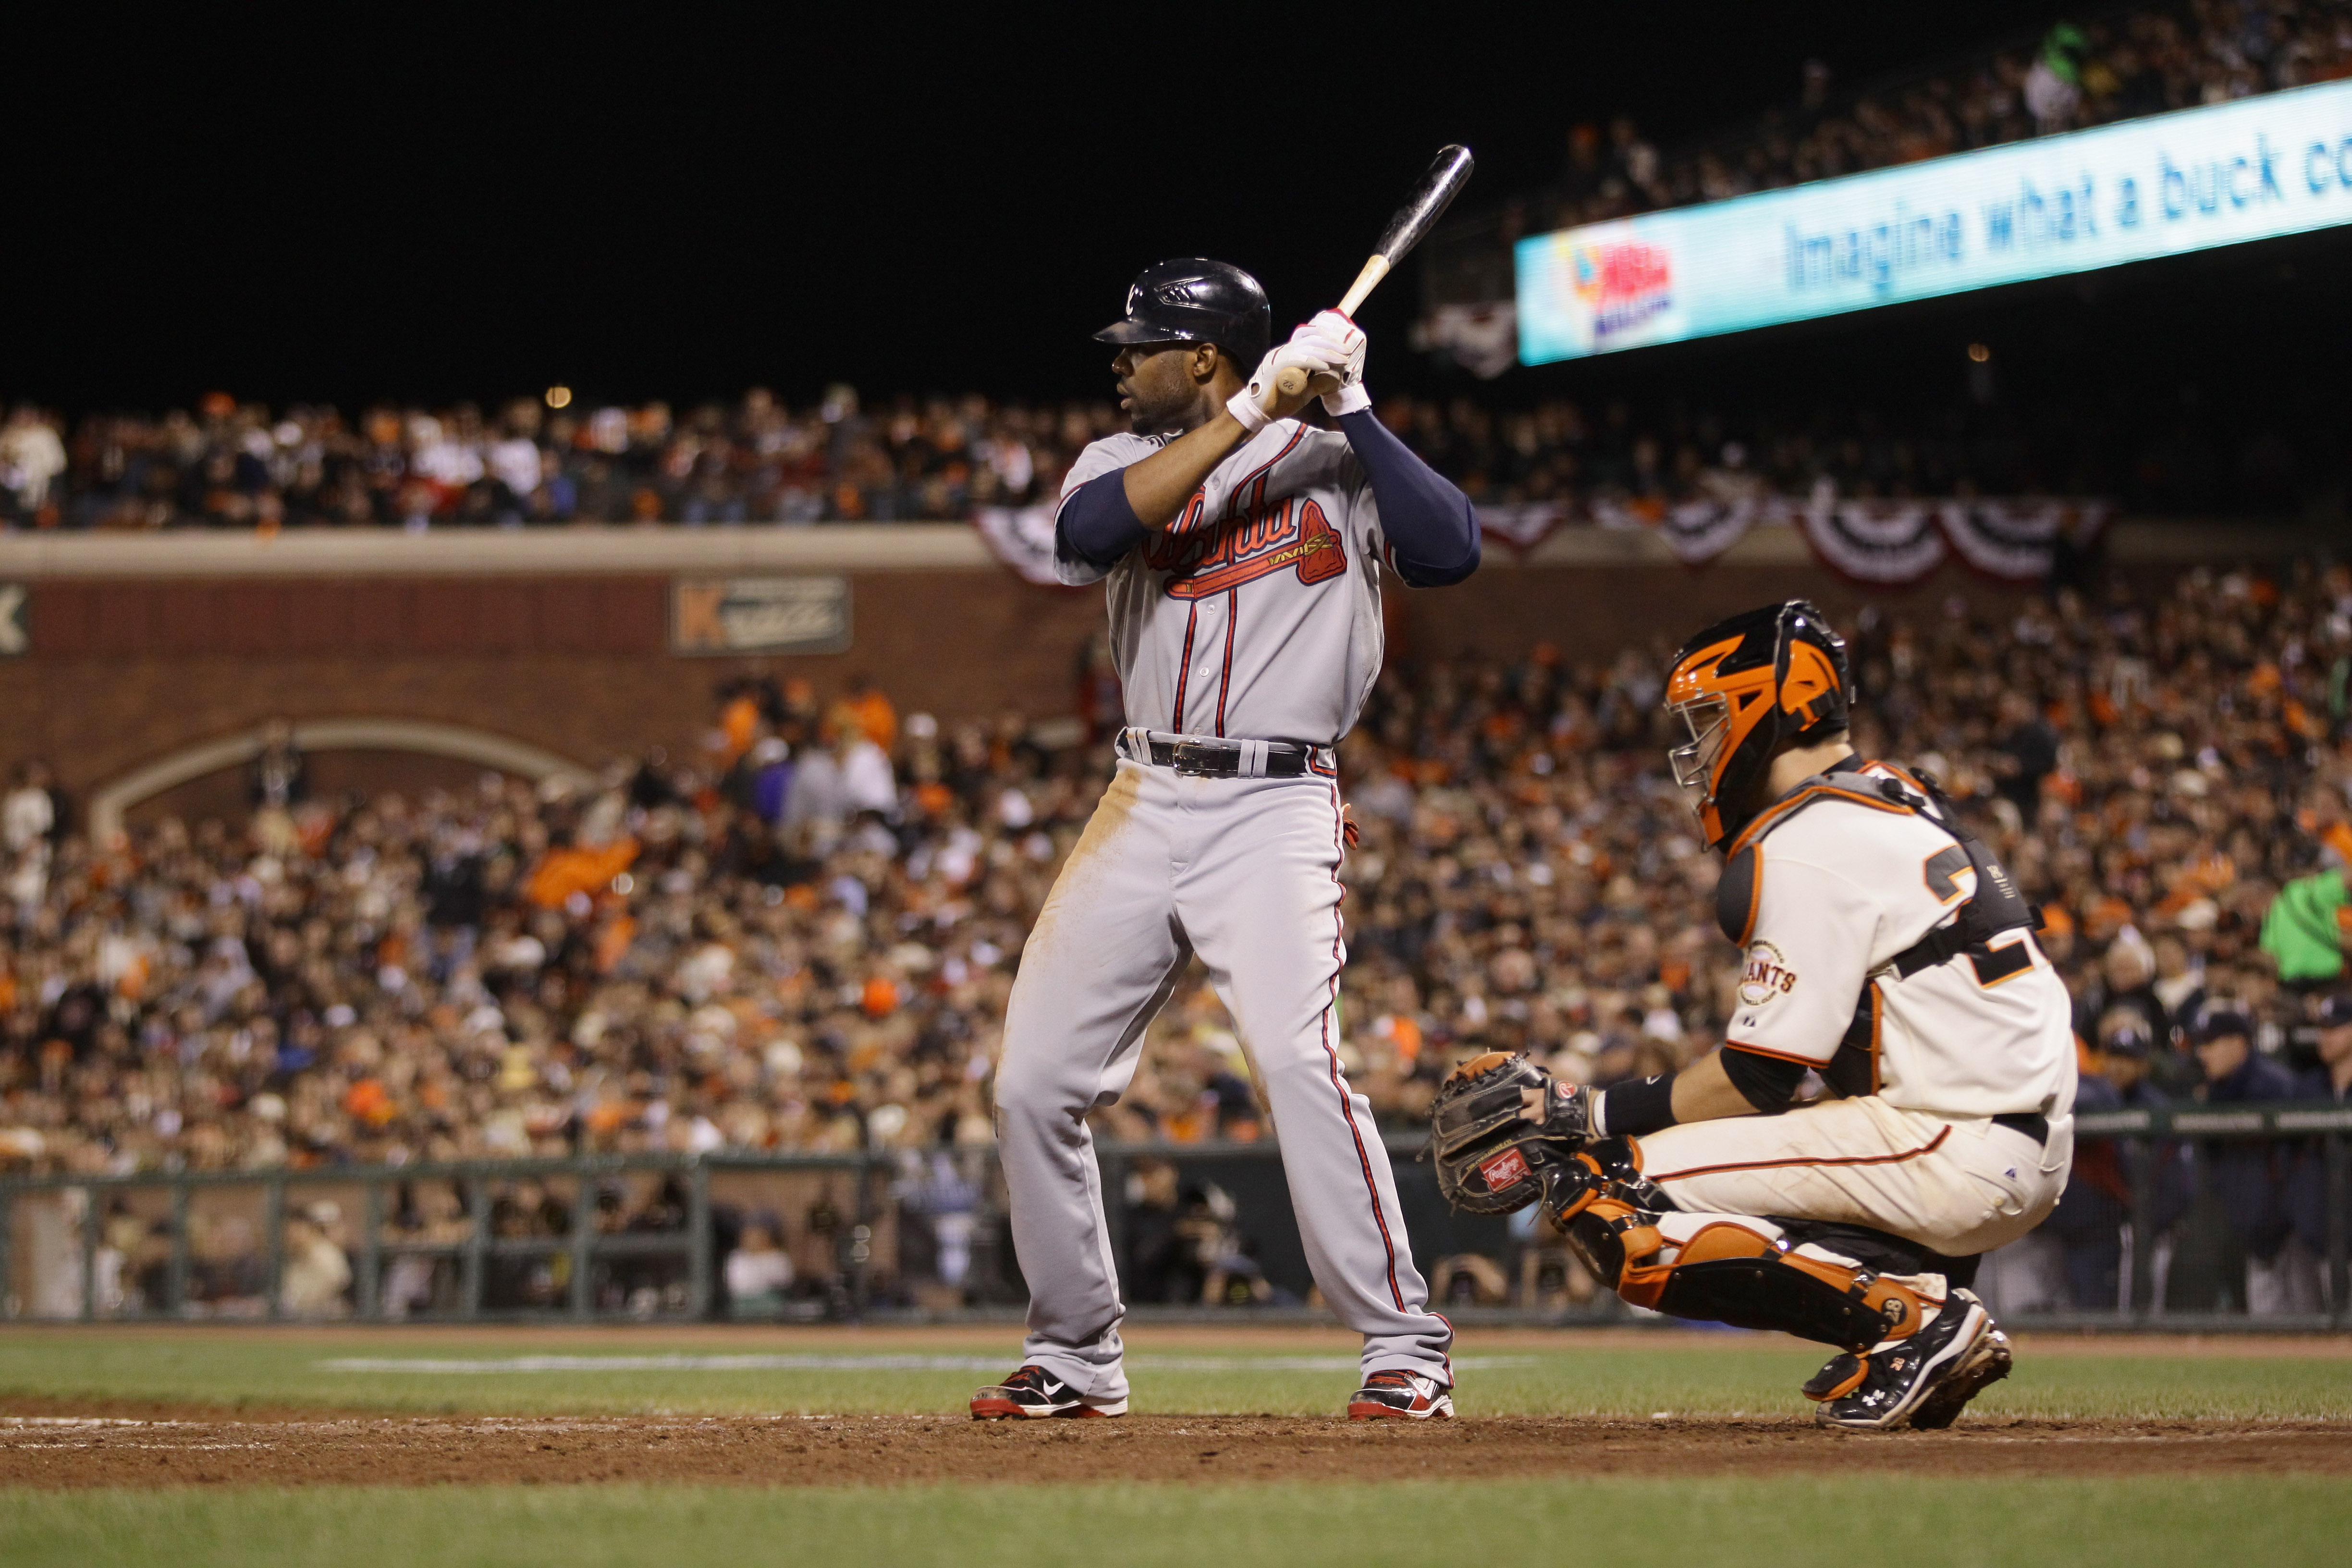 Paths of Heyward and Posey Cross Again in Baseball Playoffs - The